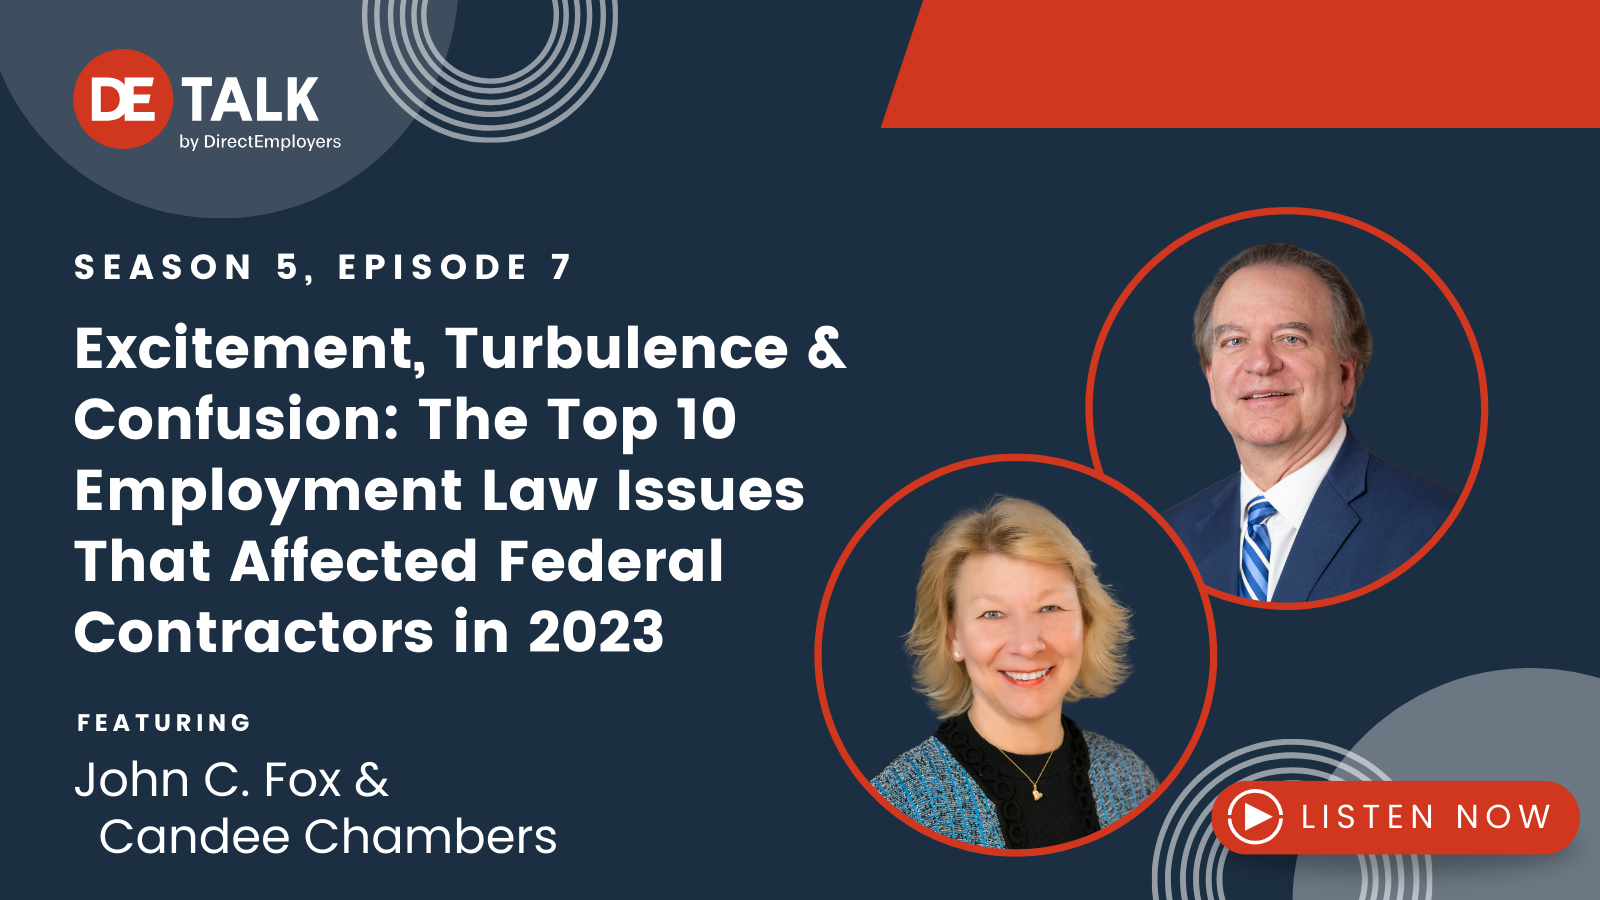 DE Talk S5 E7: The Top 10 Employment Law Issues That Affected Federal Contractors in 2023